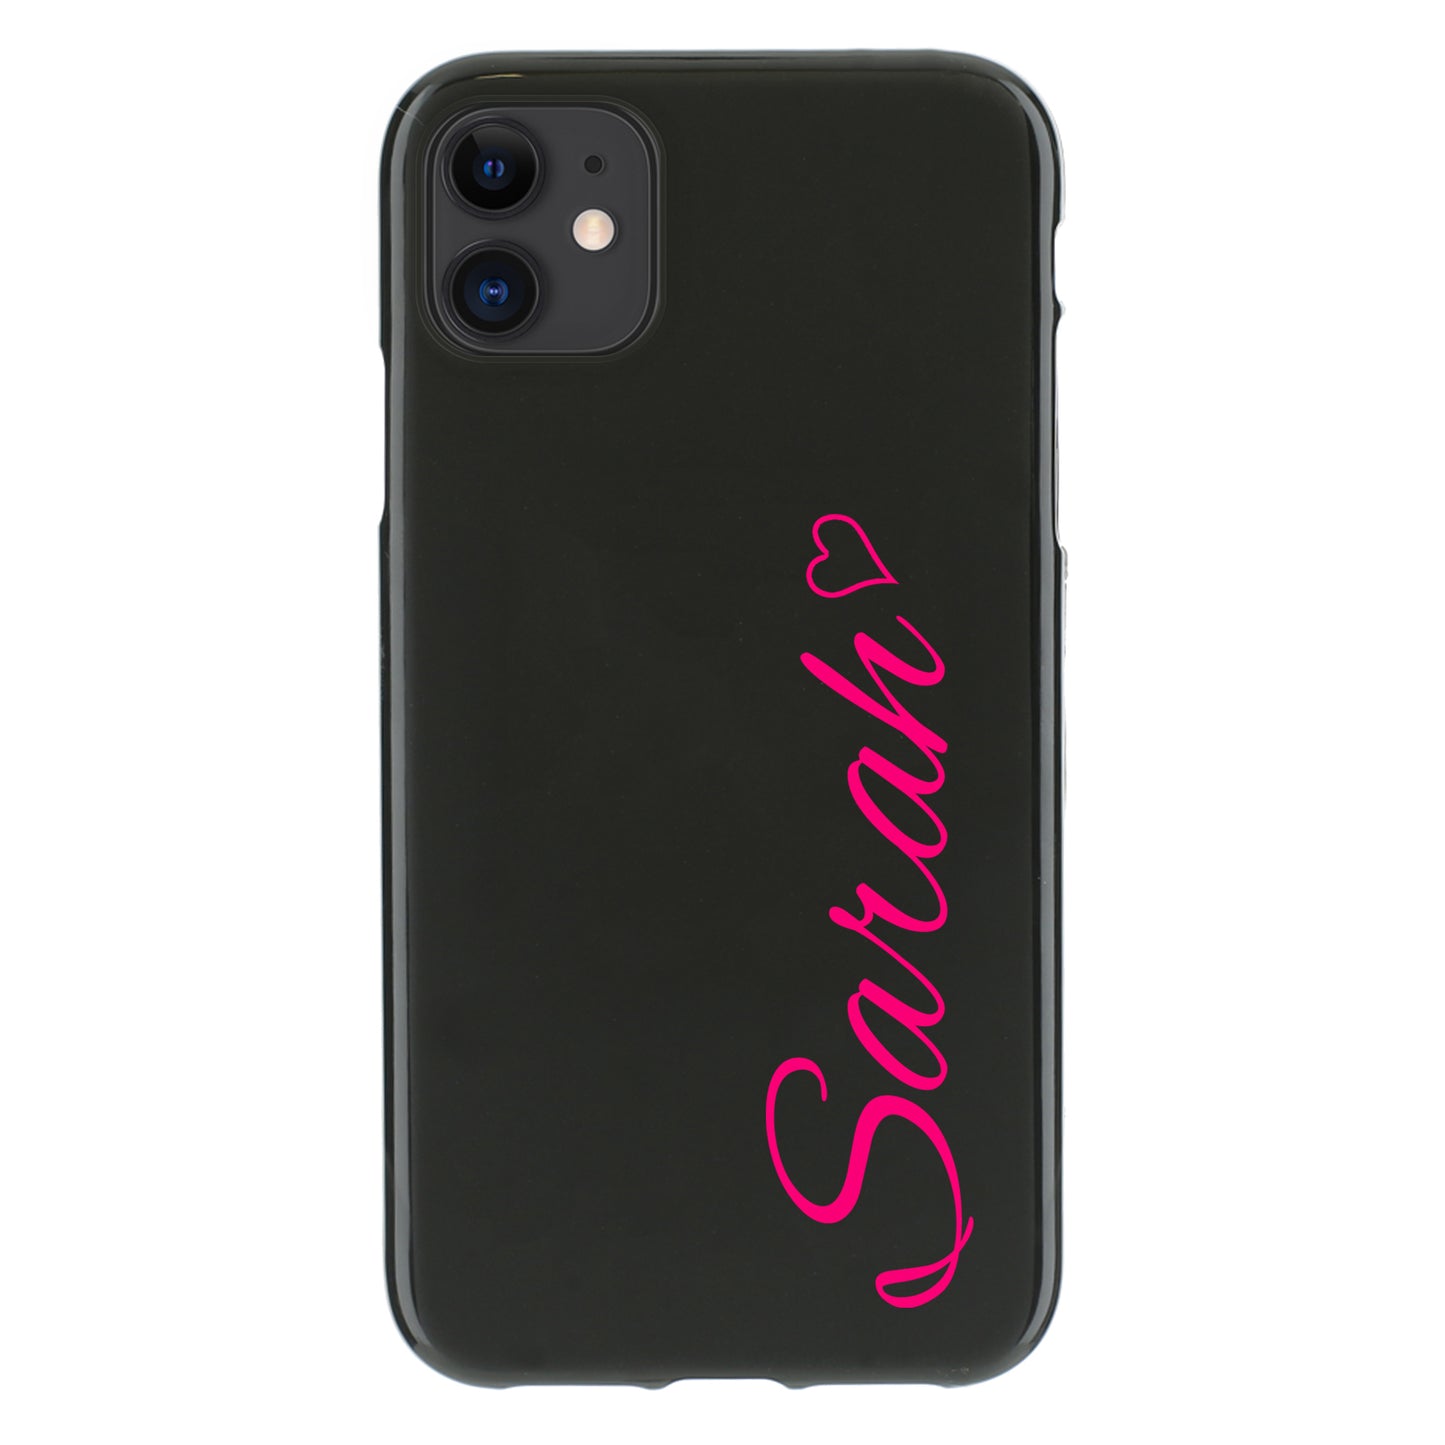 Personalised Huawei Phone Gel Case with Hot Pink Heart Accented Text